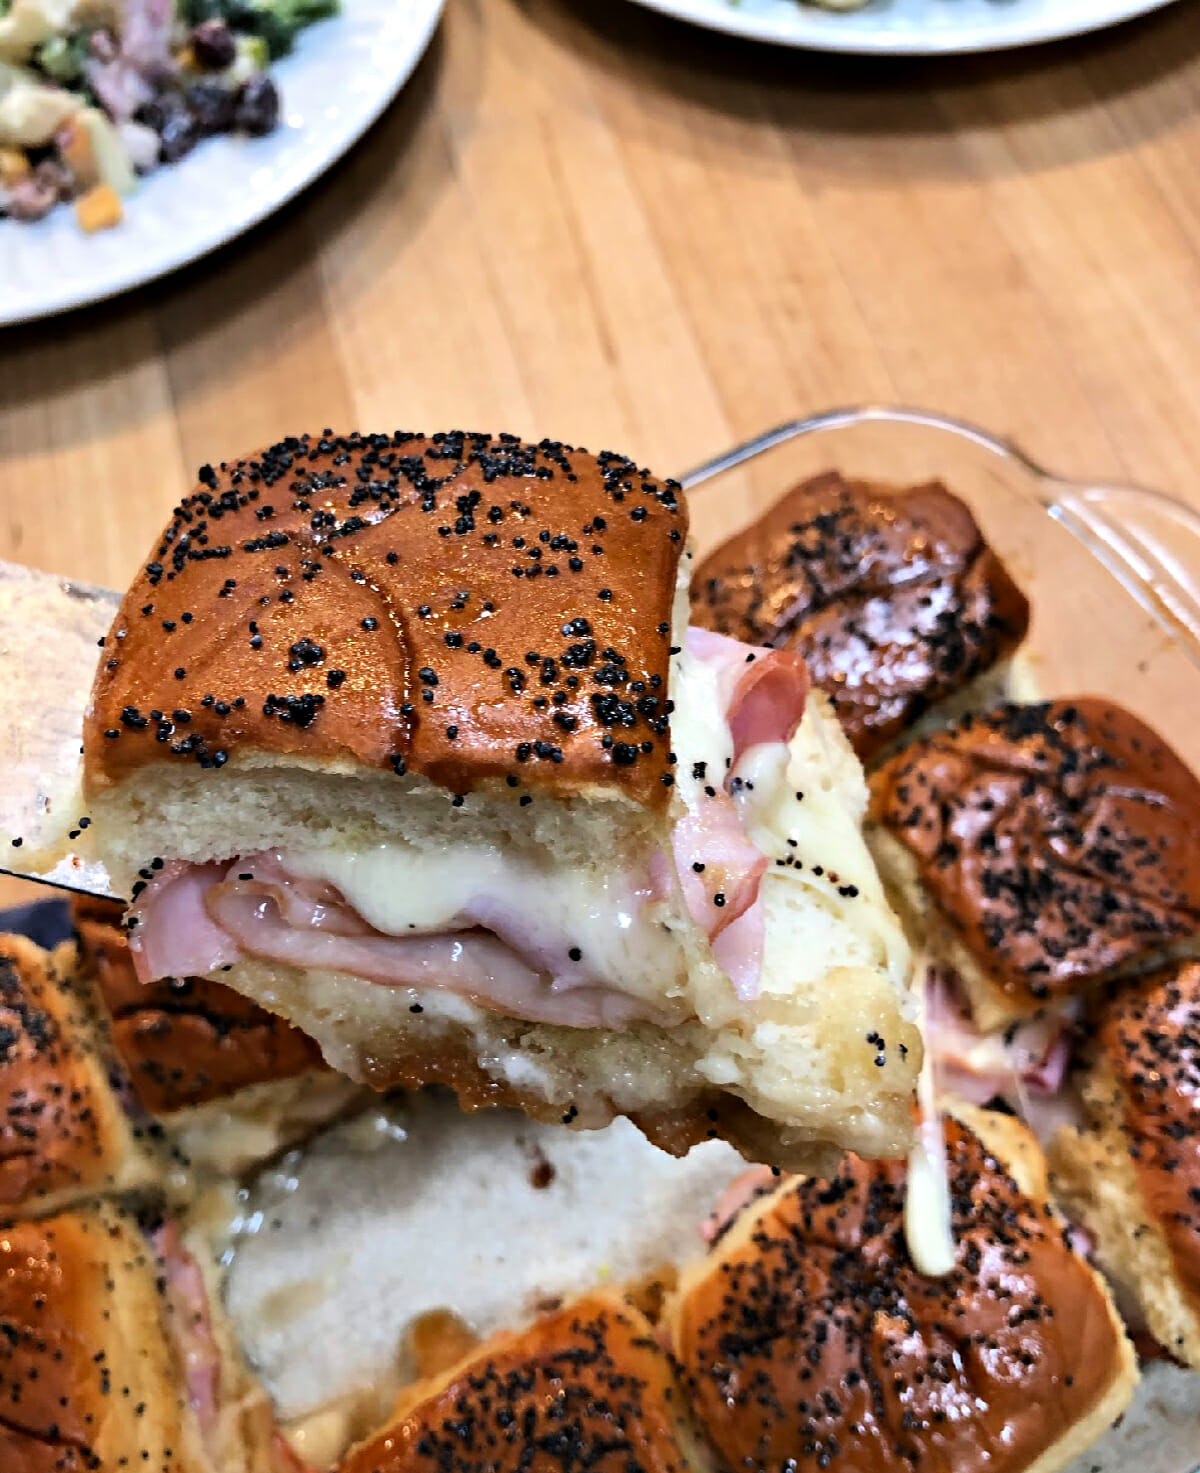 gooey ham and cheese baked sandwiches